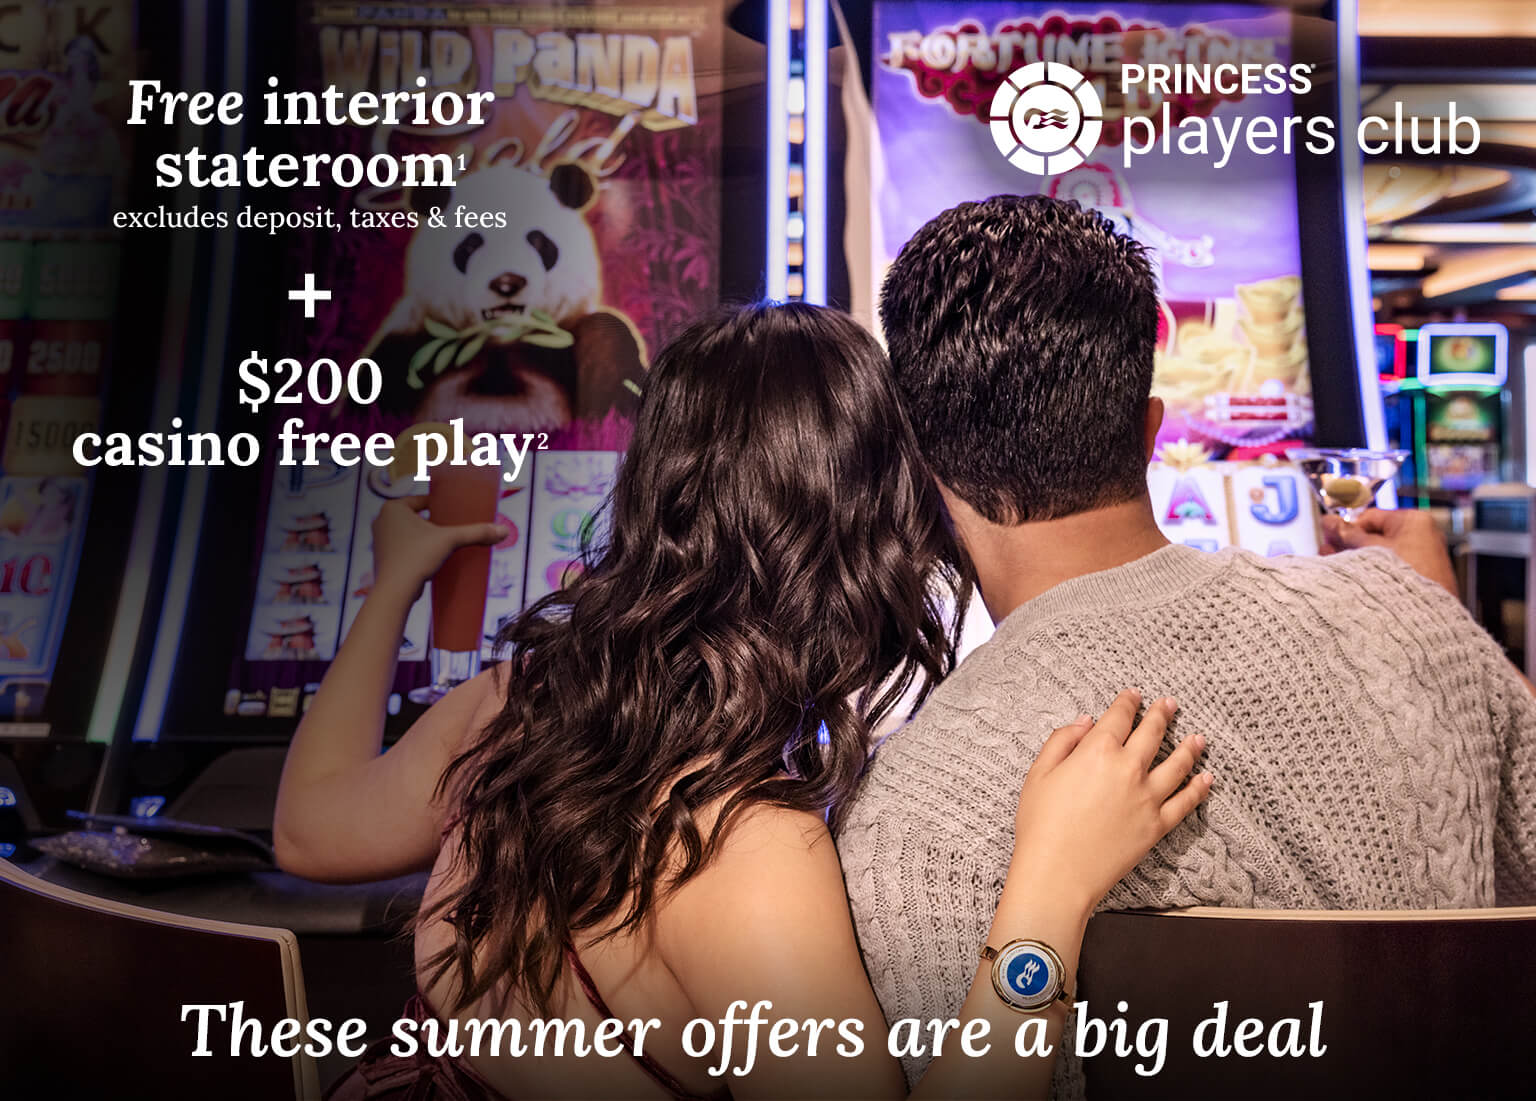 free interior stateroom + $200 casino free play. Click here to book.